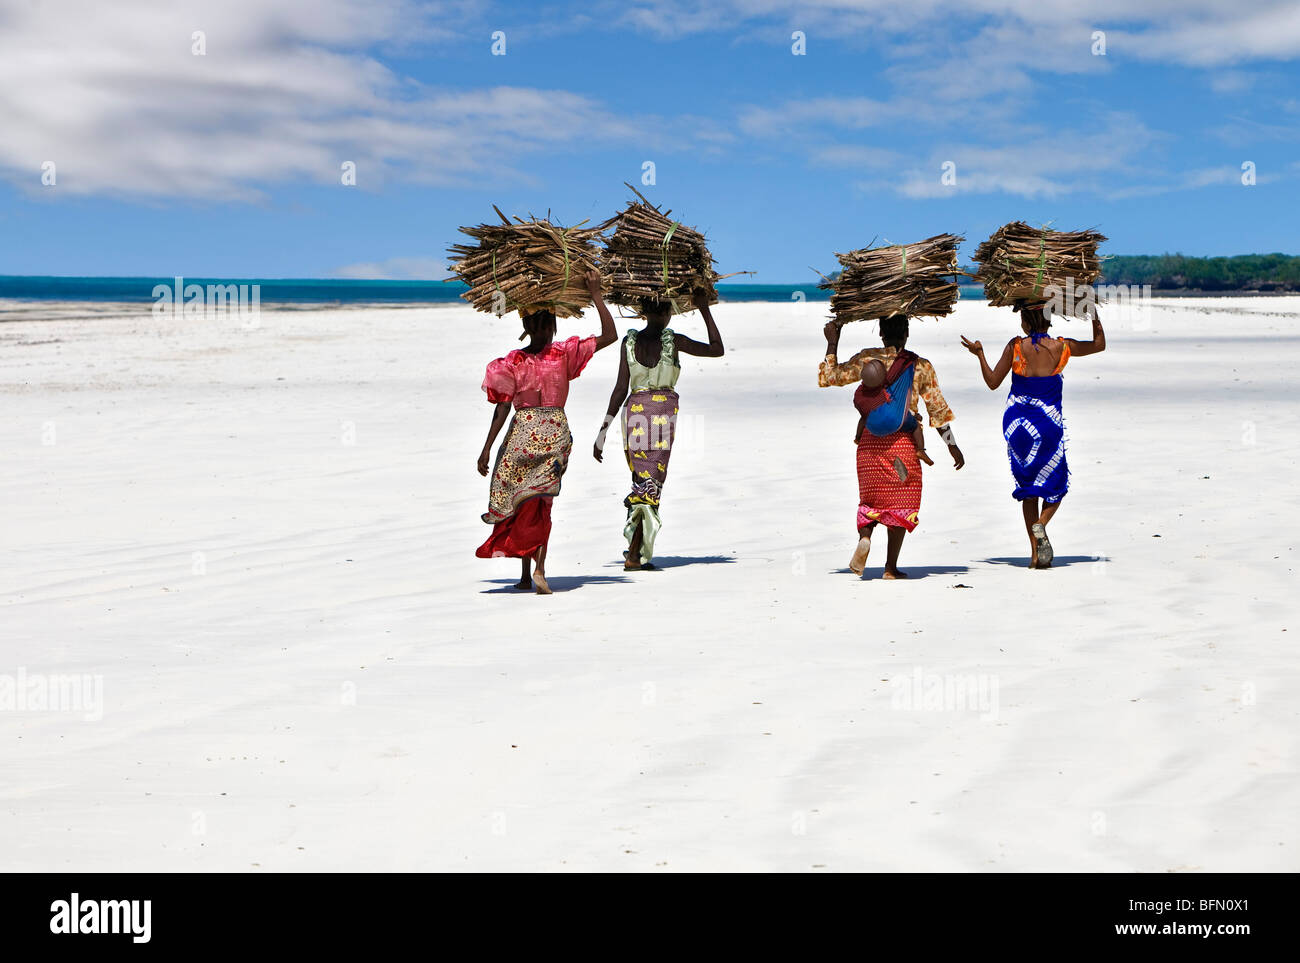 Kenya, Mombasa. Women carry on their heads makuti (dried coconut palm fronds used as roofing material) on a beach. Stock Photo